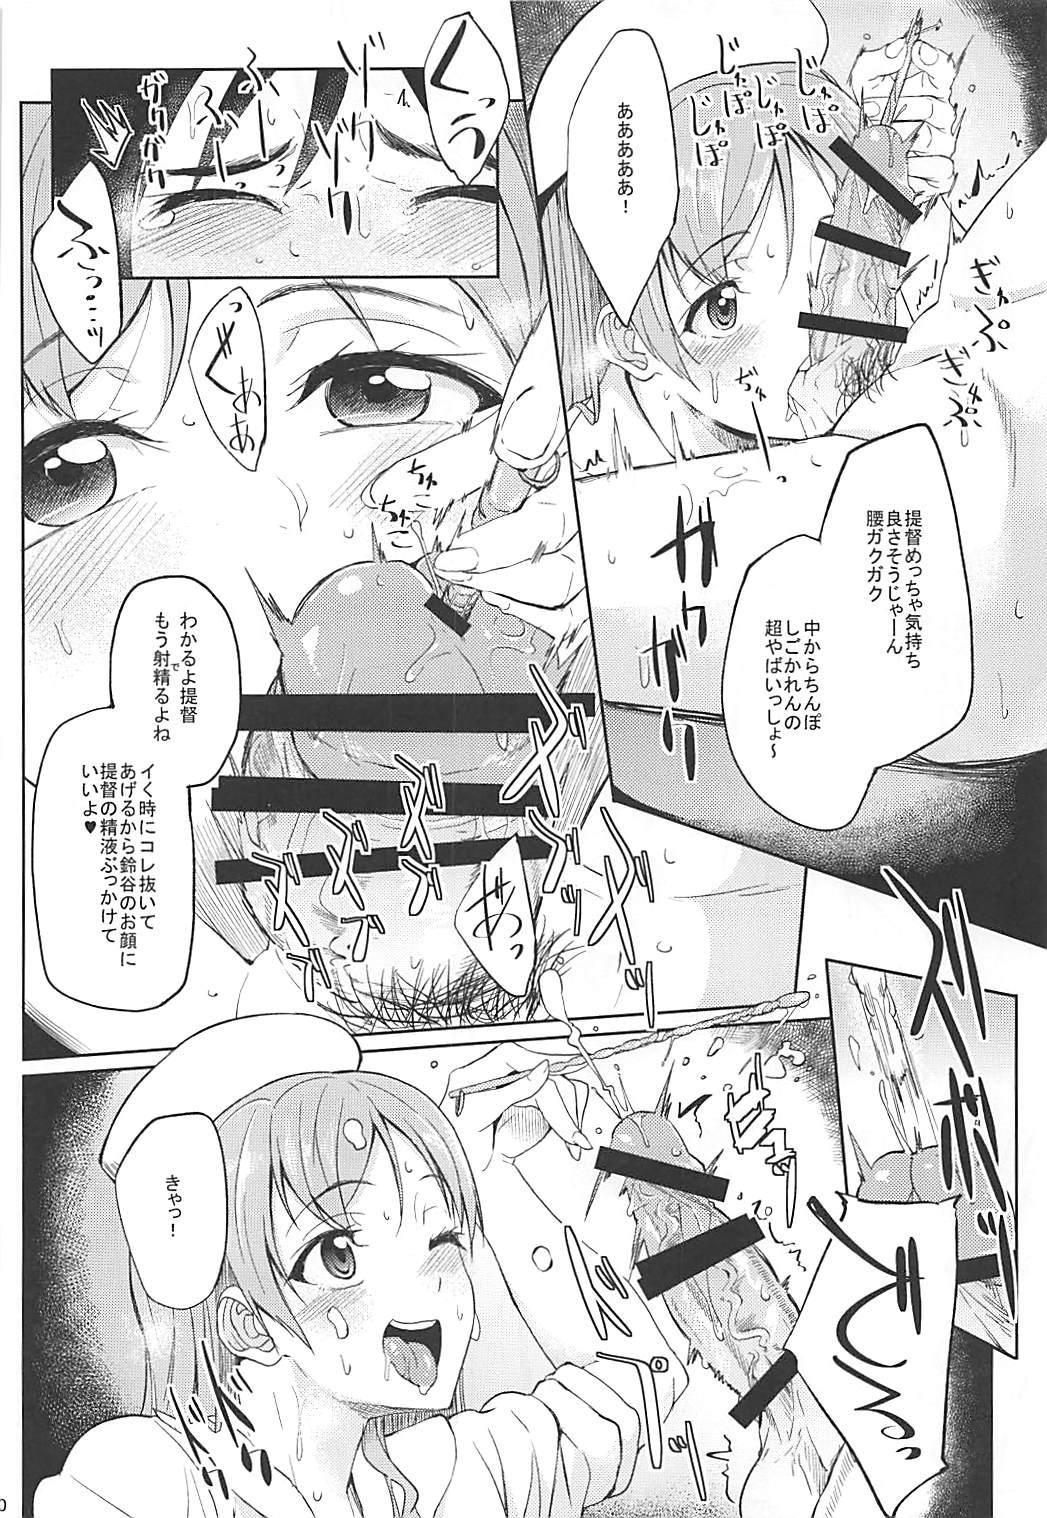 Butthole SIKO COLLE - Kantai collection Lesbian Sex - Page 10